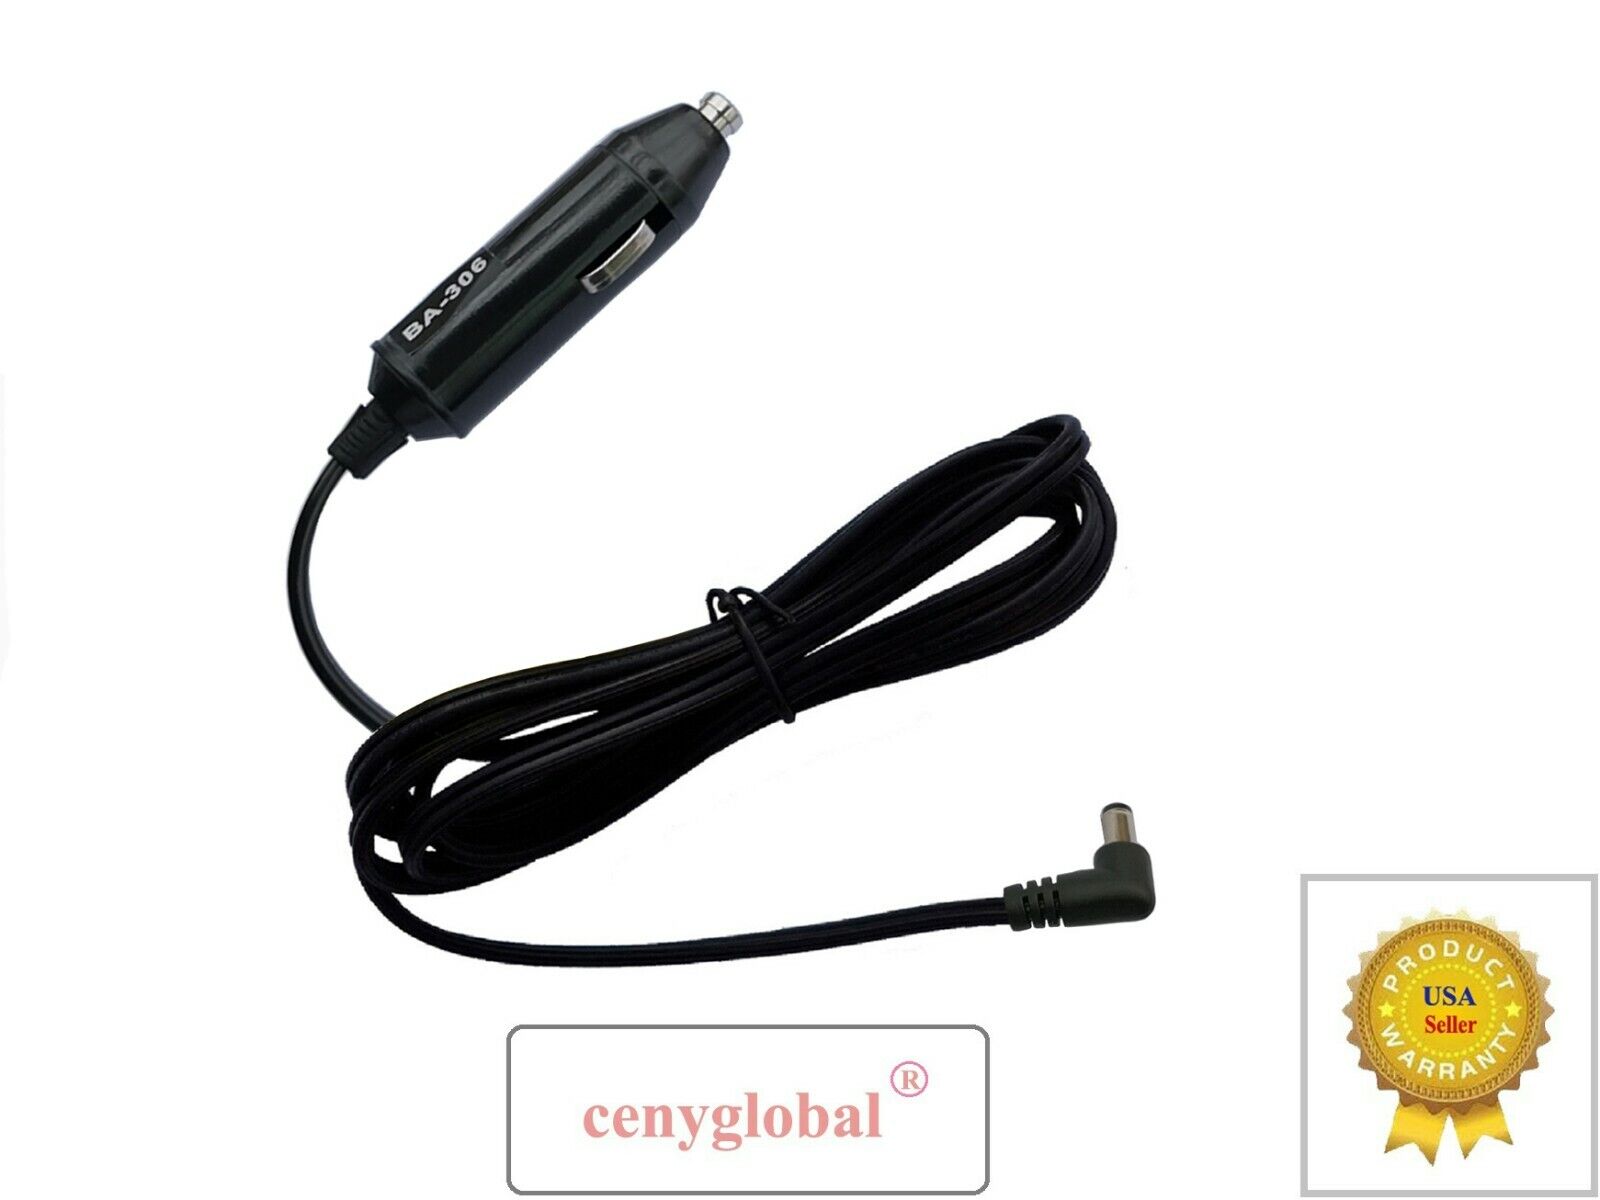 New BA-306 Cheap bargain Car Power Supply Cable Adapter G One Inogen G3 Classic for G4